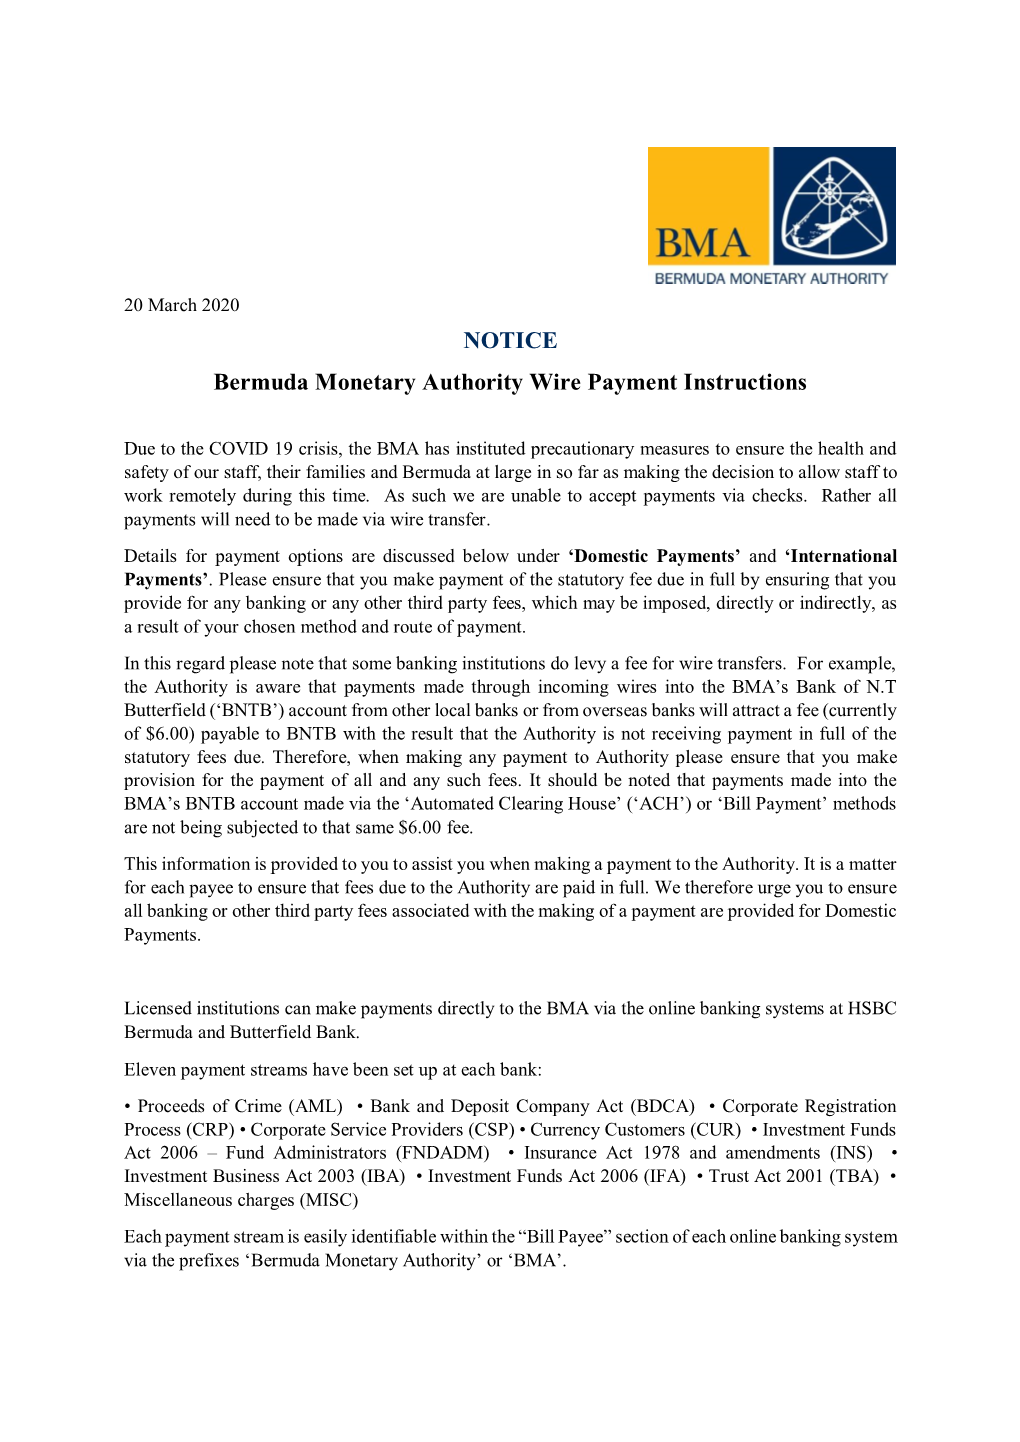 NOTICE Bermuda Monetary Authority Wire Payment Instructions